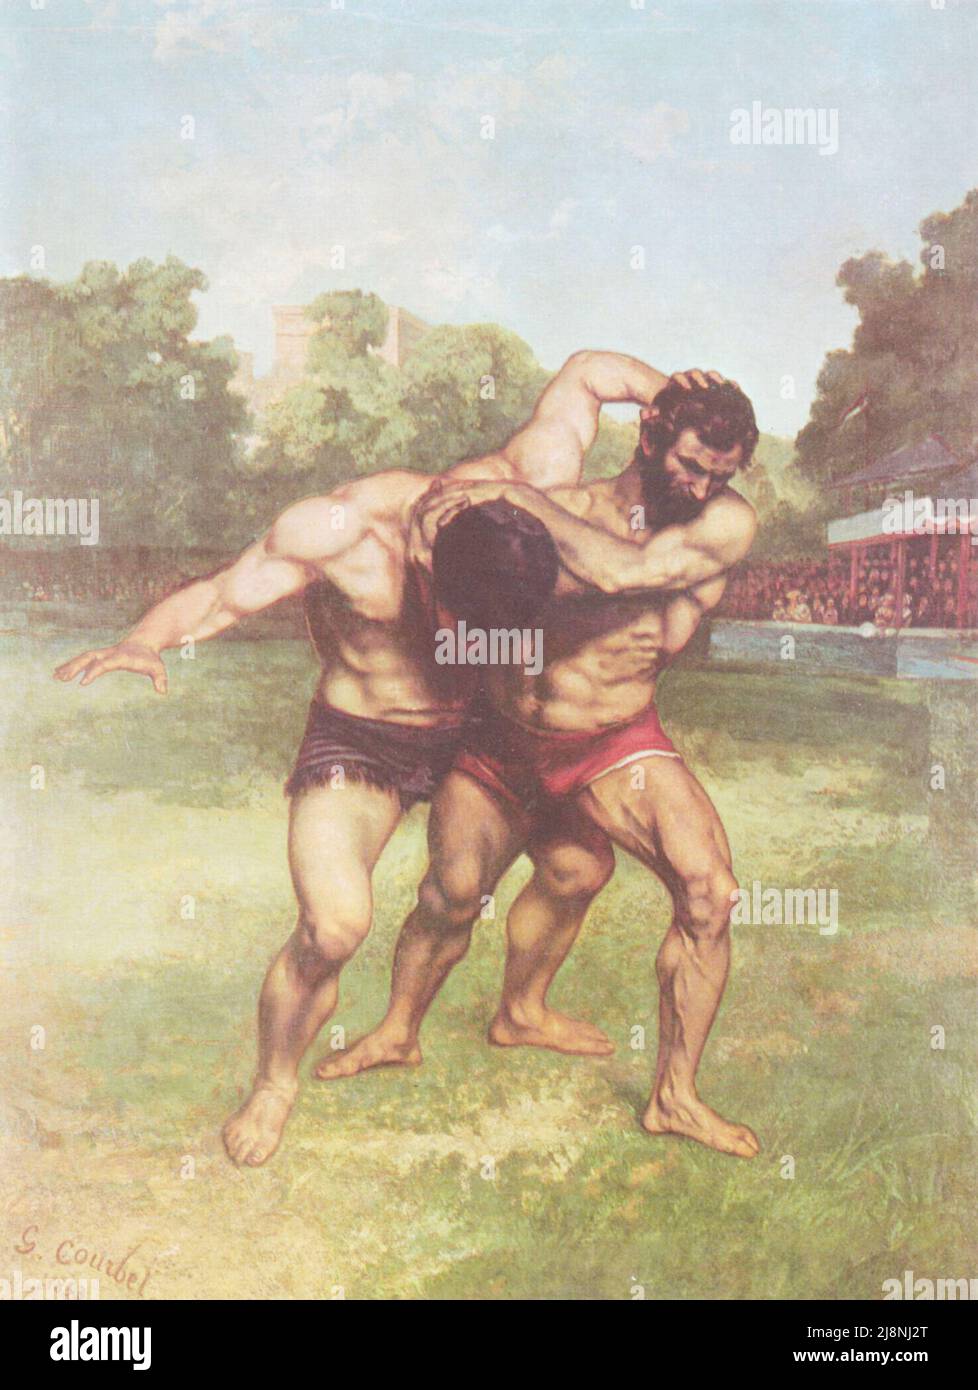 Gustave Courbet - The Wrestlers - 1853 Stock Photo